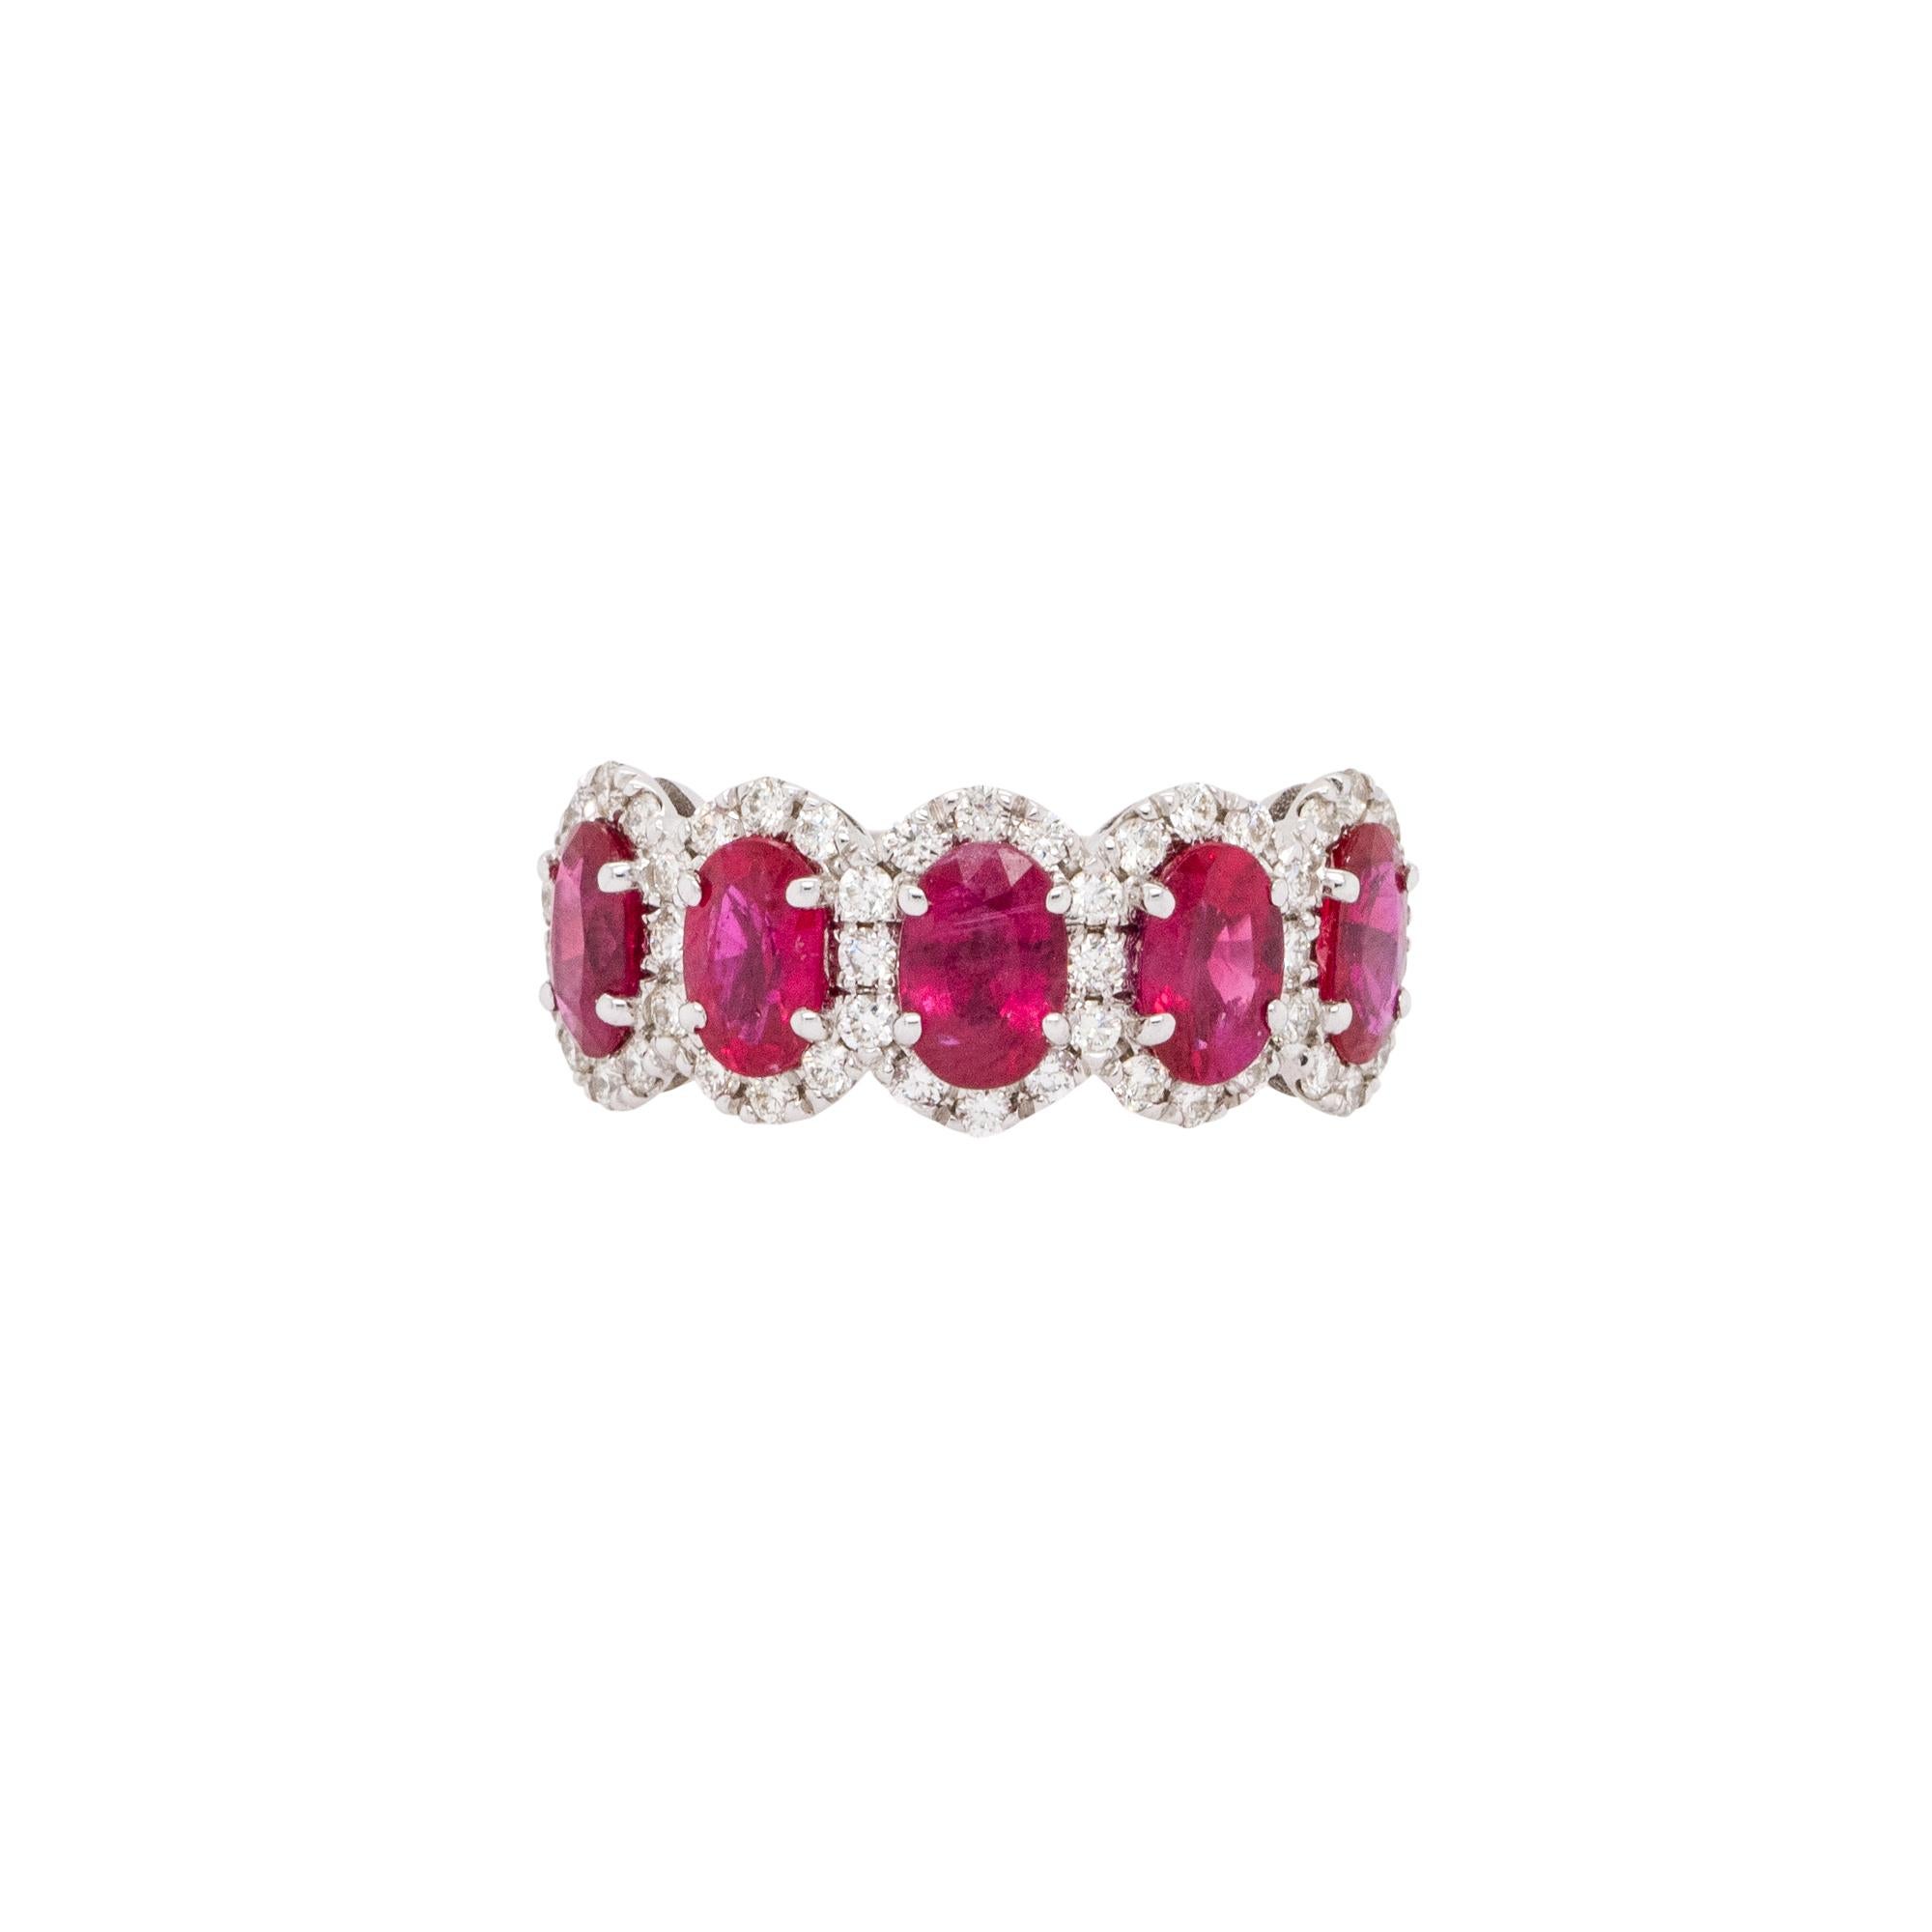 Material: 18k White Gold
Gemstone details: Approx. 2.90ctw of oval cut Ruby gemstones
Diamond details: Approx. 0.53ctw of round cut Diamonds. Diamonds are G/H in color and VS in clarity
Ring Size: 6.25 
Ring Measurements: 22mm x 8.5mm 22.50mm 
Total